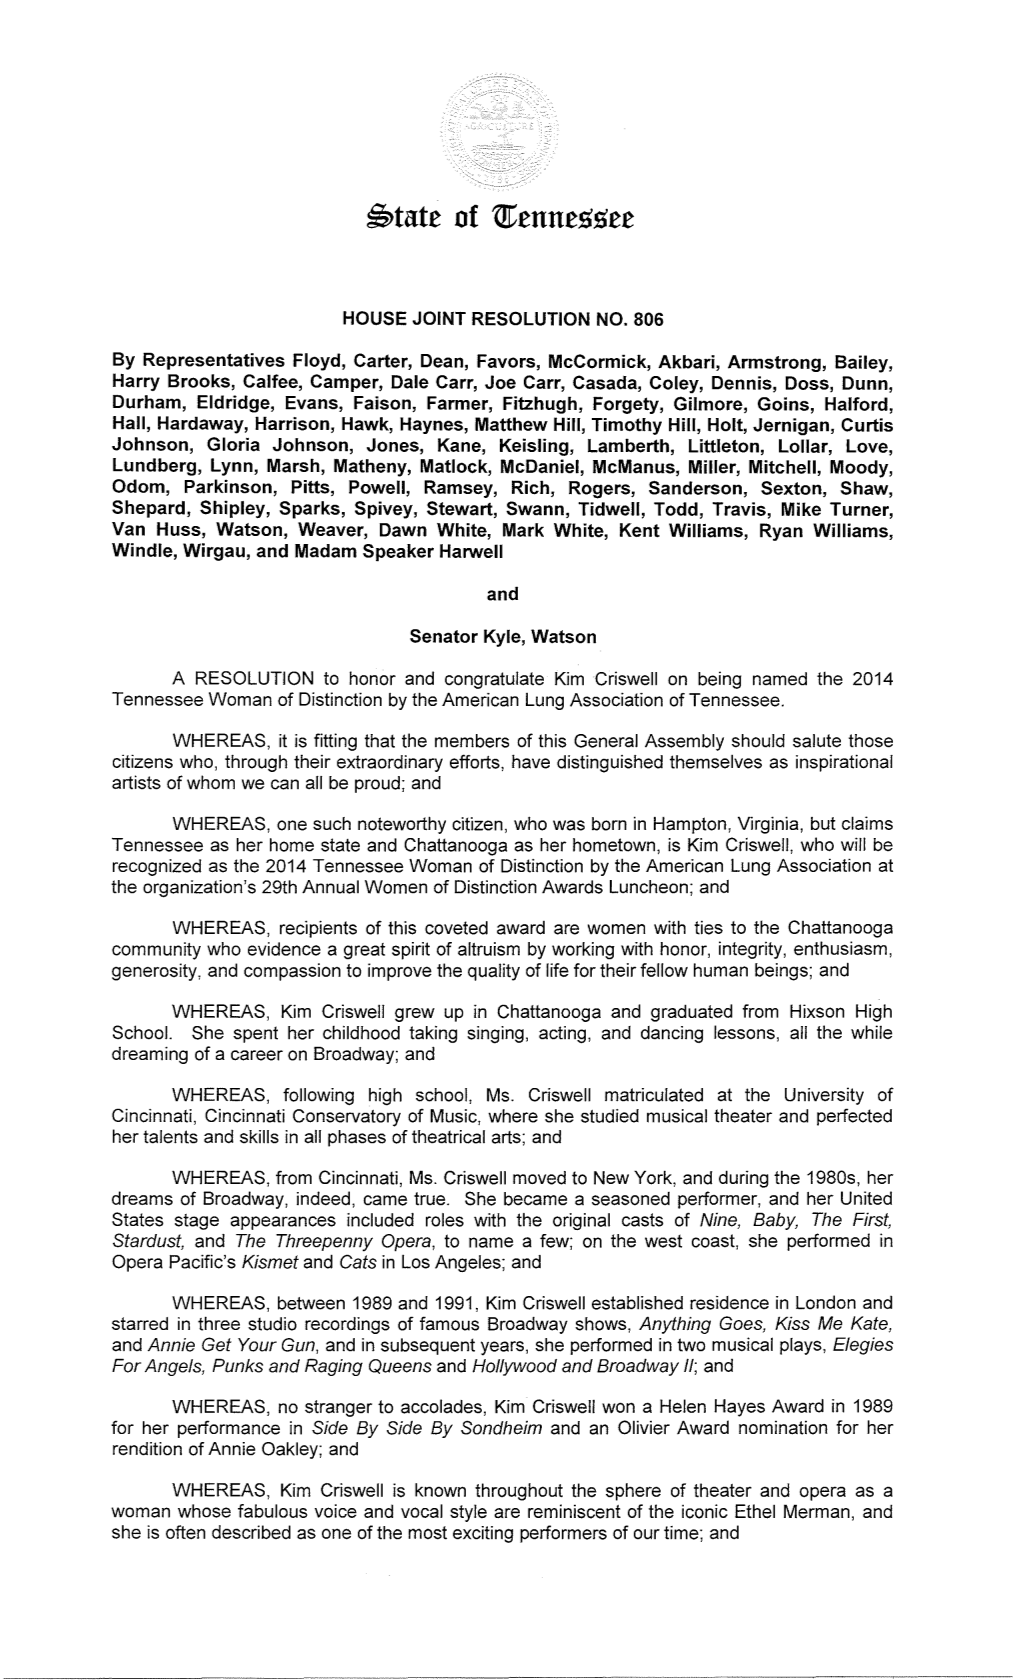 HOUSE JOINT RESOLUTION NO. 806 by Representatives Floyd, Carter